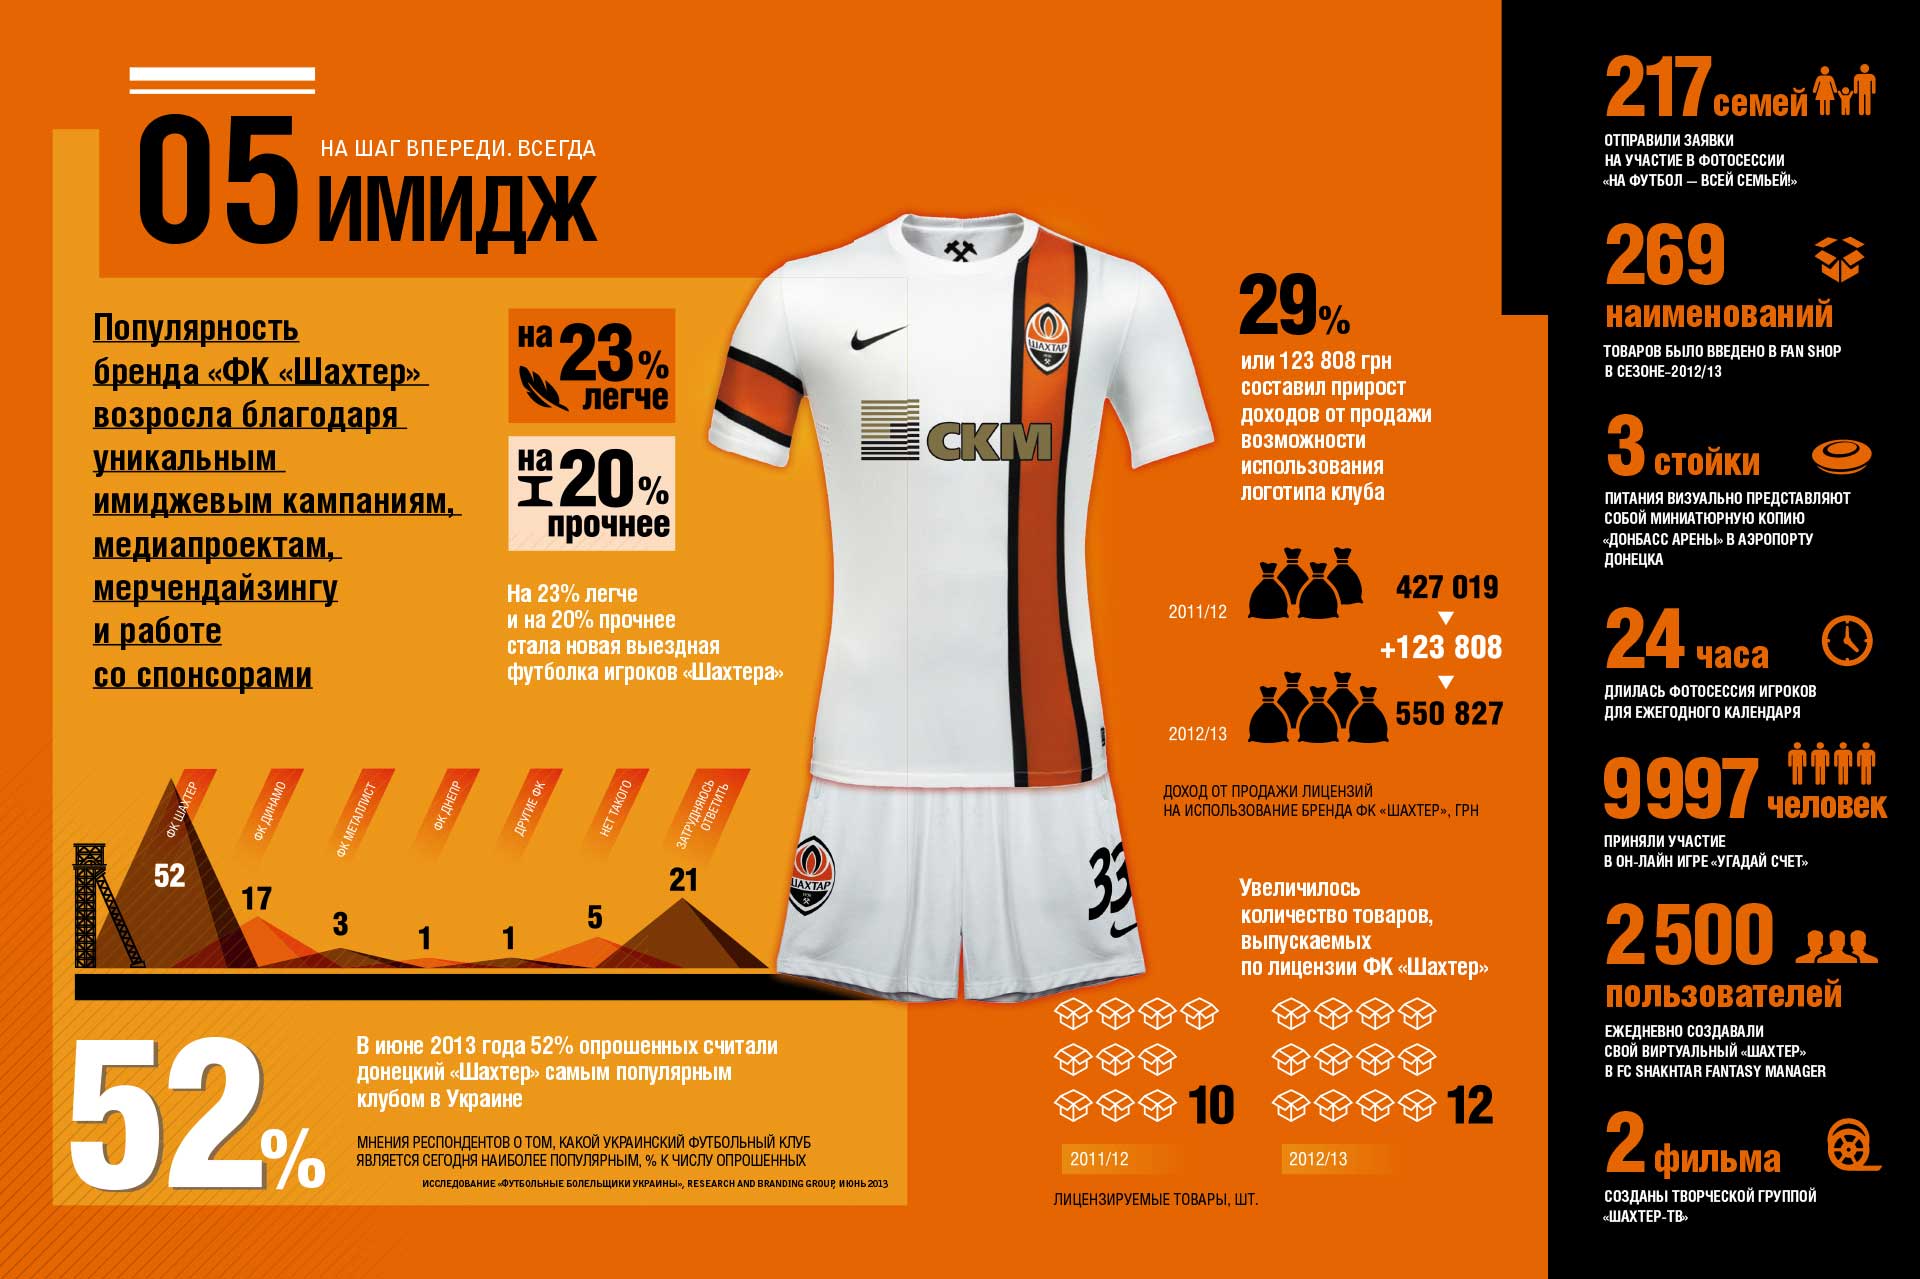 Annual Report, FC Shakhtar